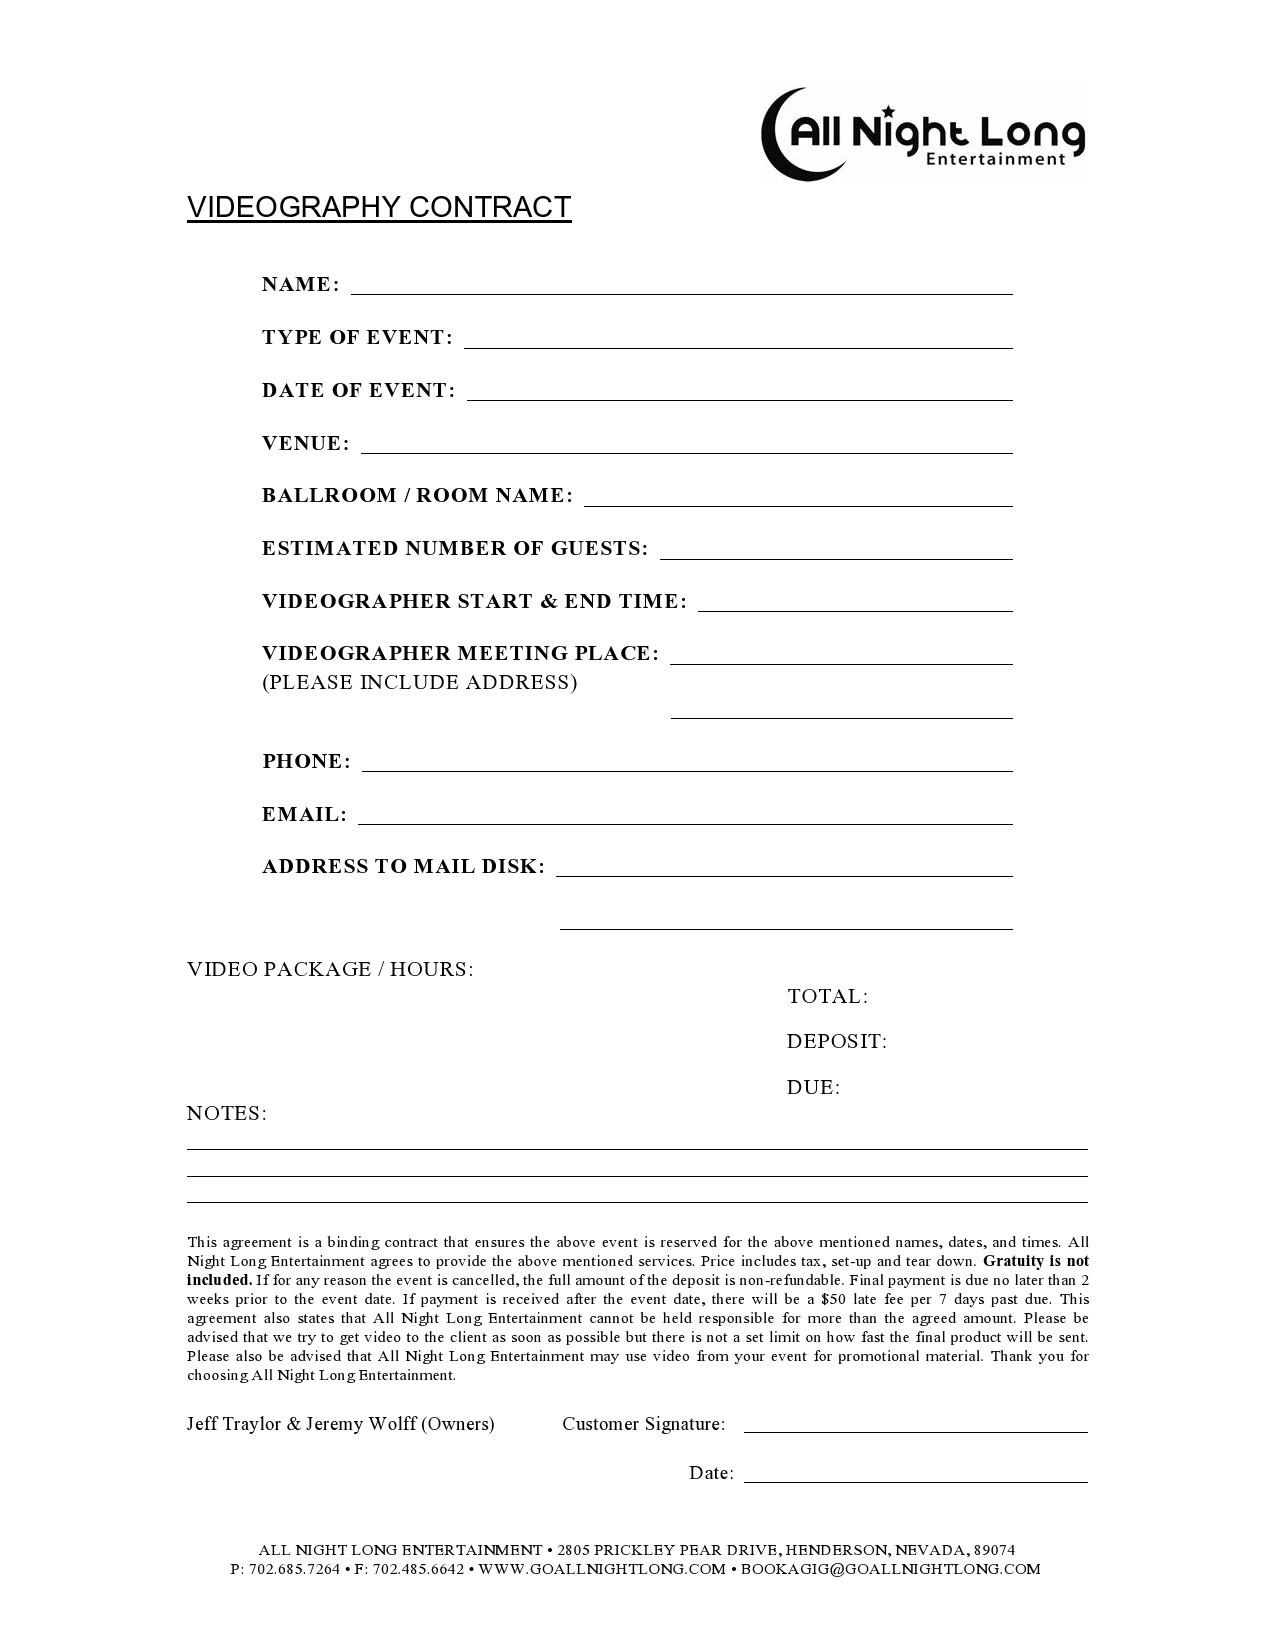 Free videography contract 08